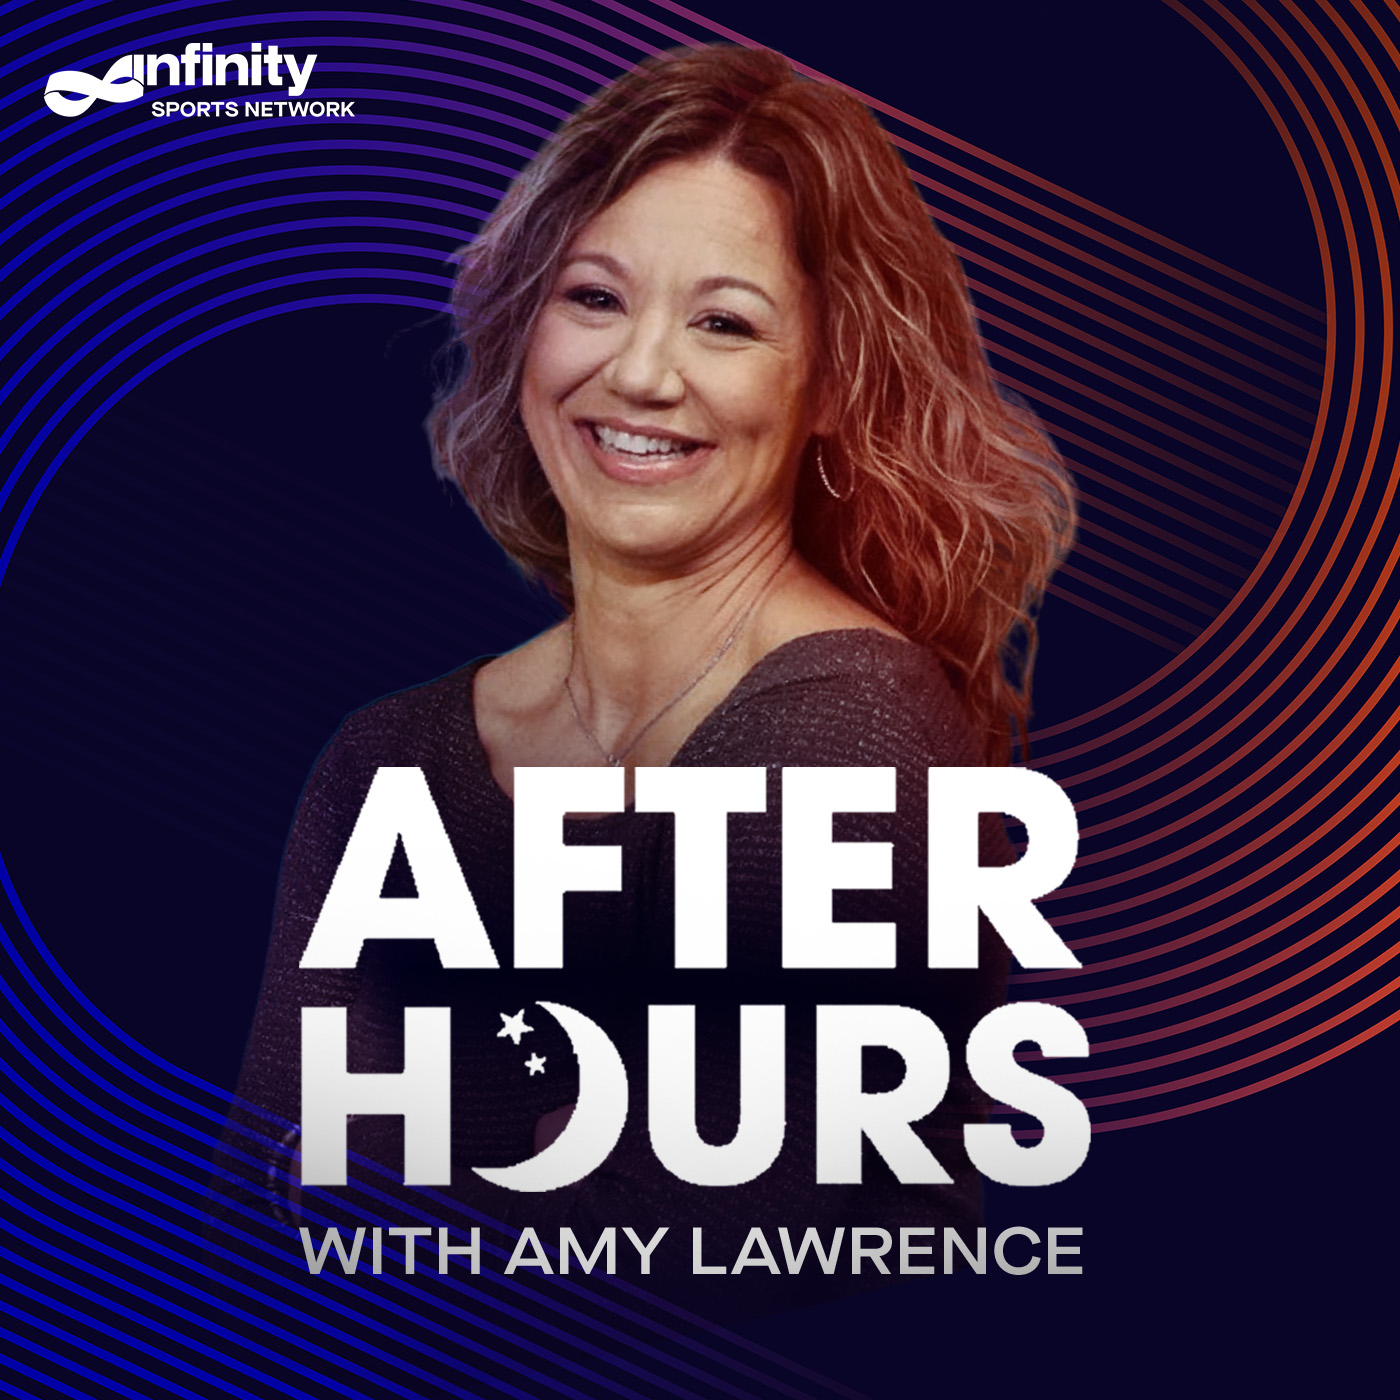 10-29-21 After Hours with Amy Lawrence PODCAST: Hour 3